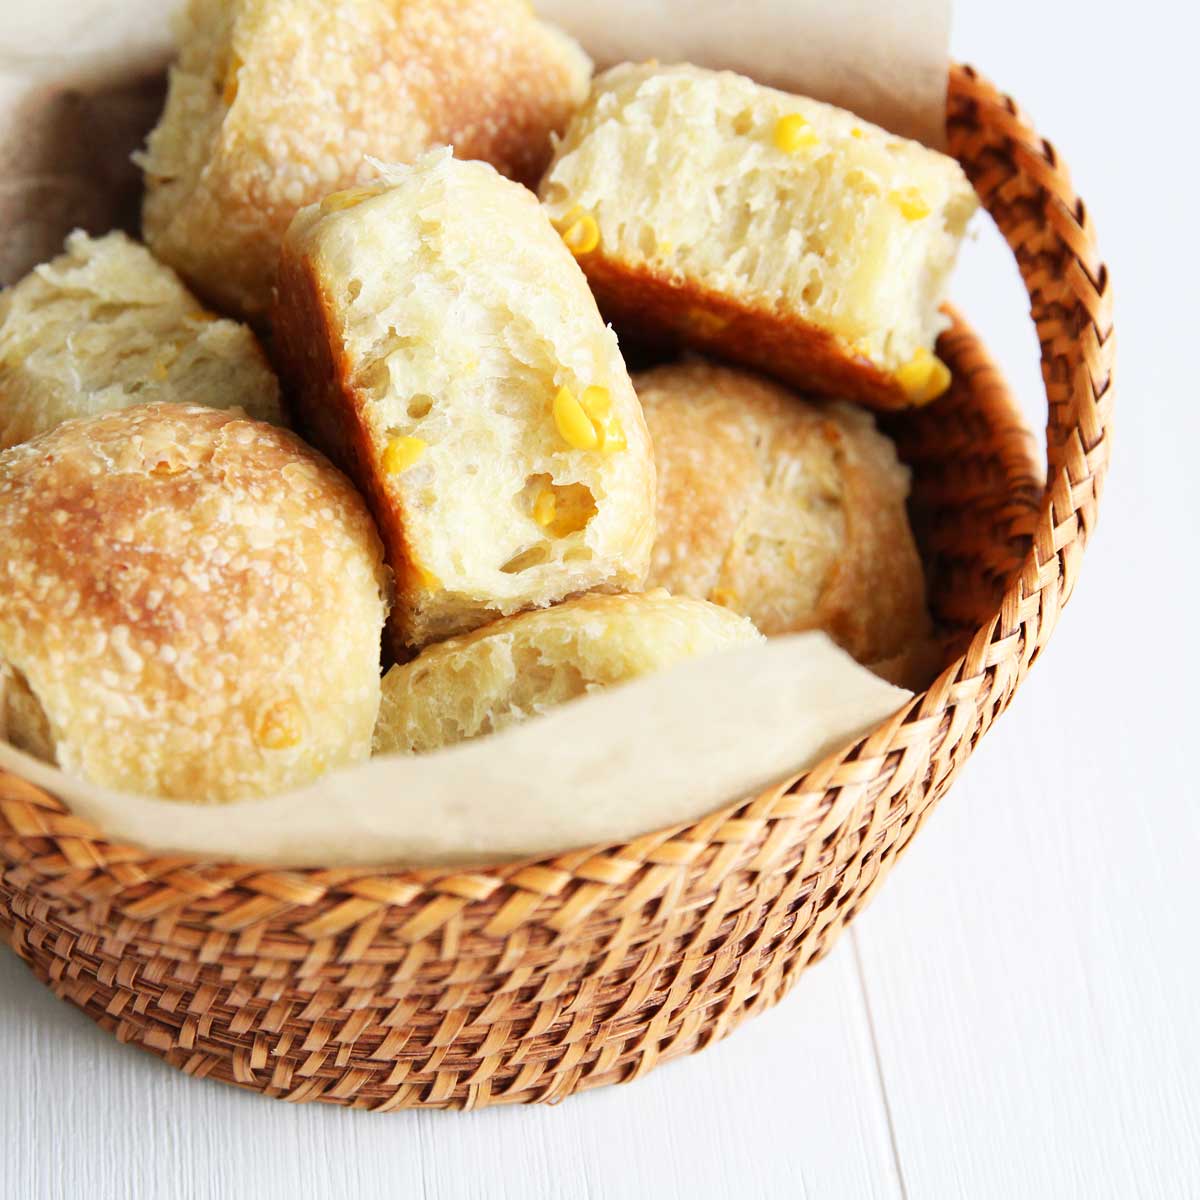 Creamed Corn Dinner Rolls: Easy 4-ingredient Recipe made with Canned Creamed Corn - Sweet Corn Flatbread